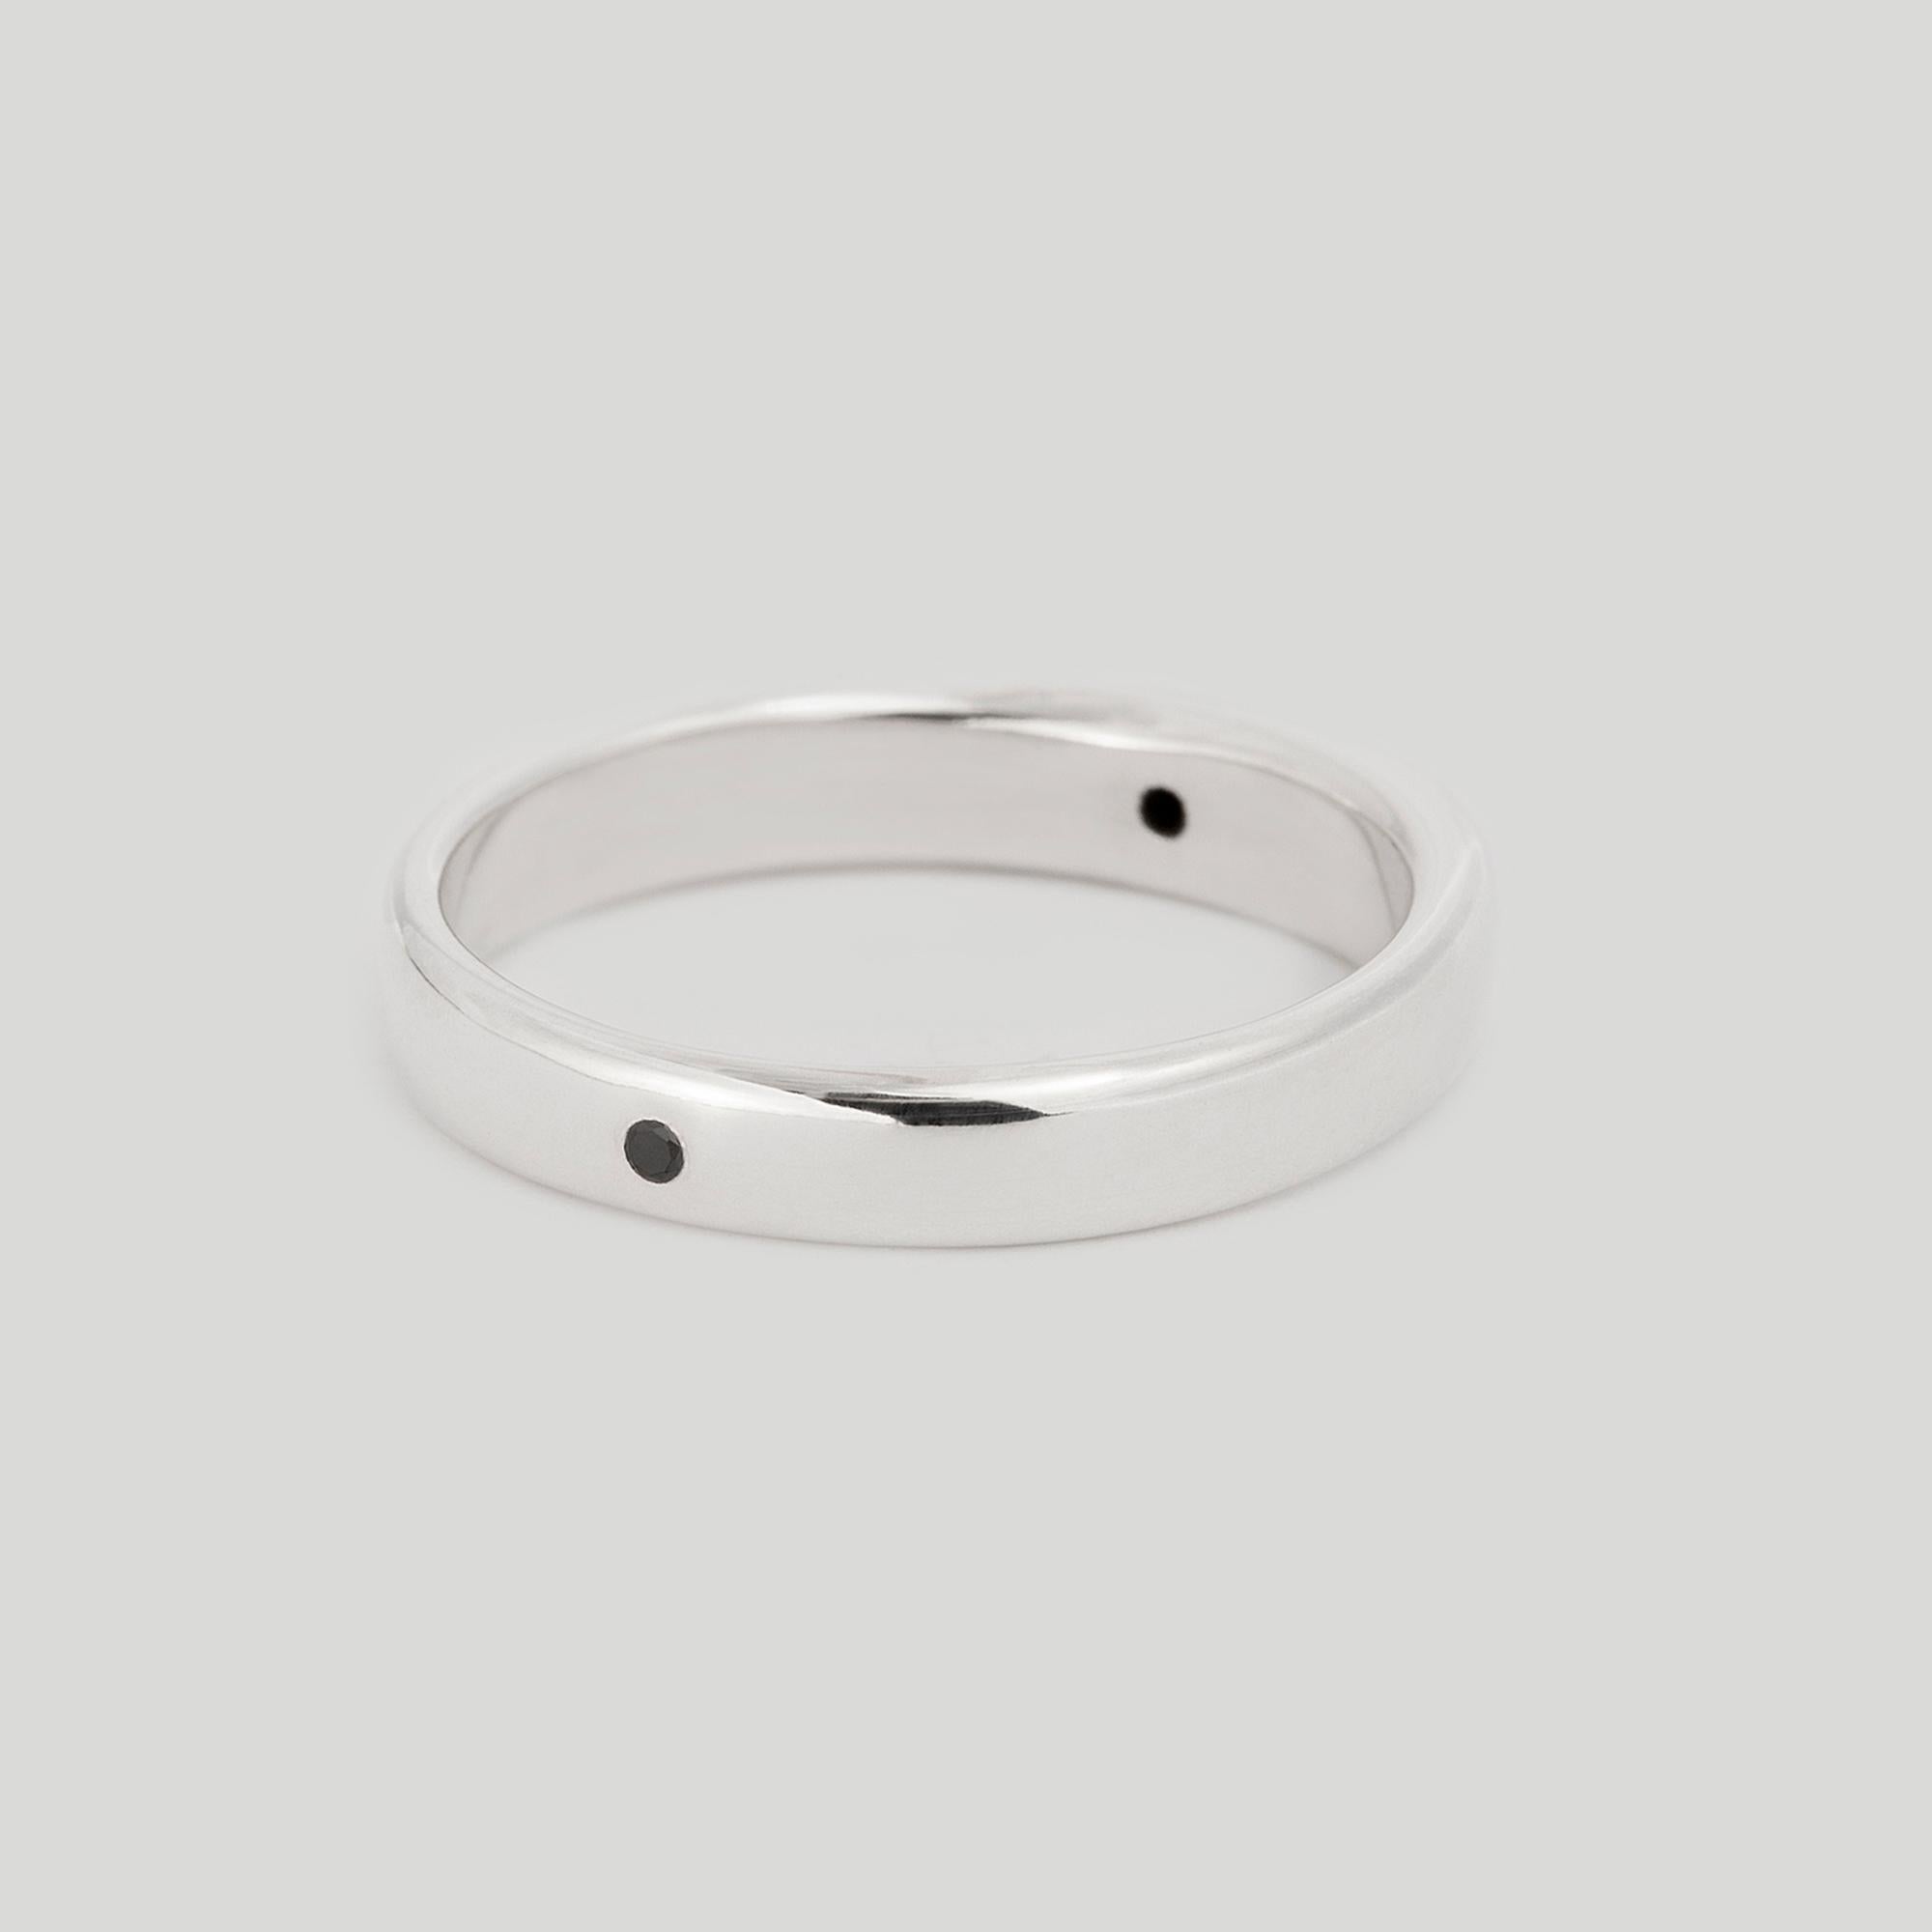 Two ends of a spectrum. A formal representation of dark and light matter.

STERLING SILVER
US RING SIZE 7
READY TO SHIP
*Shipment of this piece is not affected by COVID-19. Orders welcome!*

STONES
◘  (North axis) 1.3mm brilliant-cut White Diamond
◘